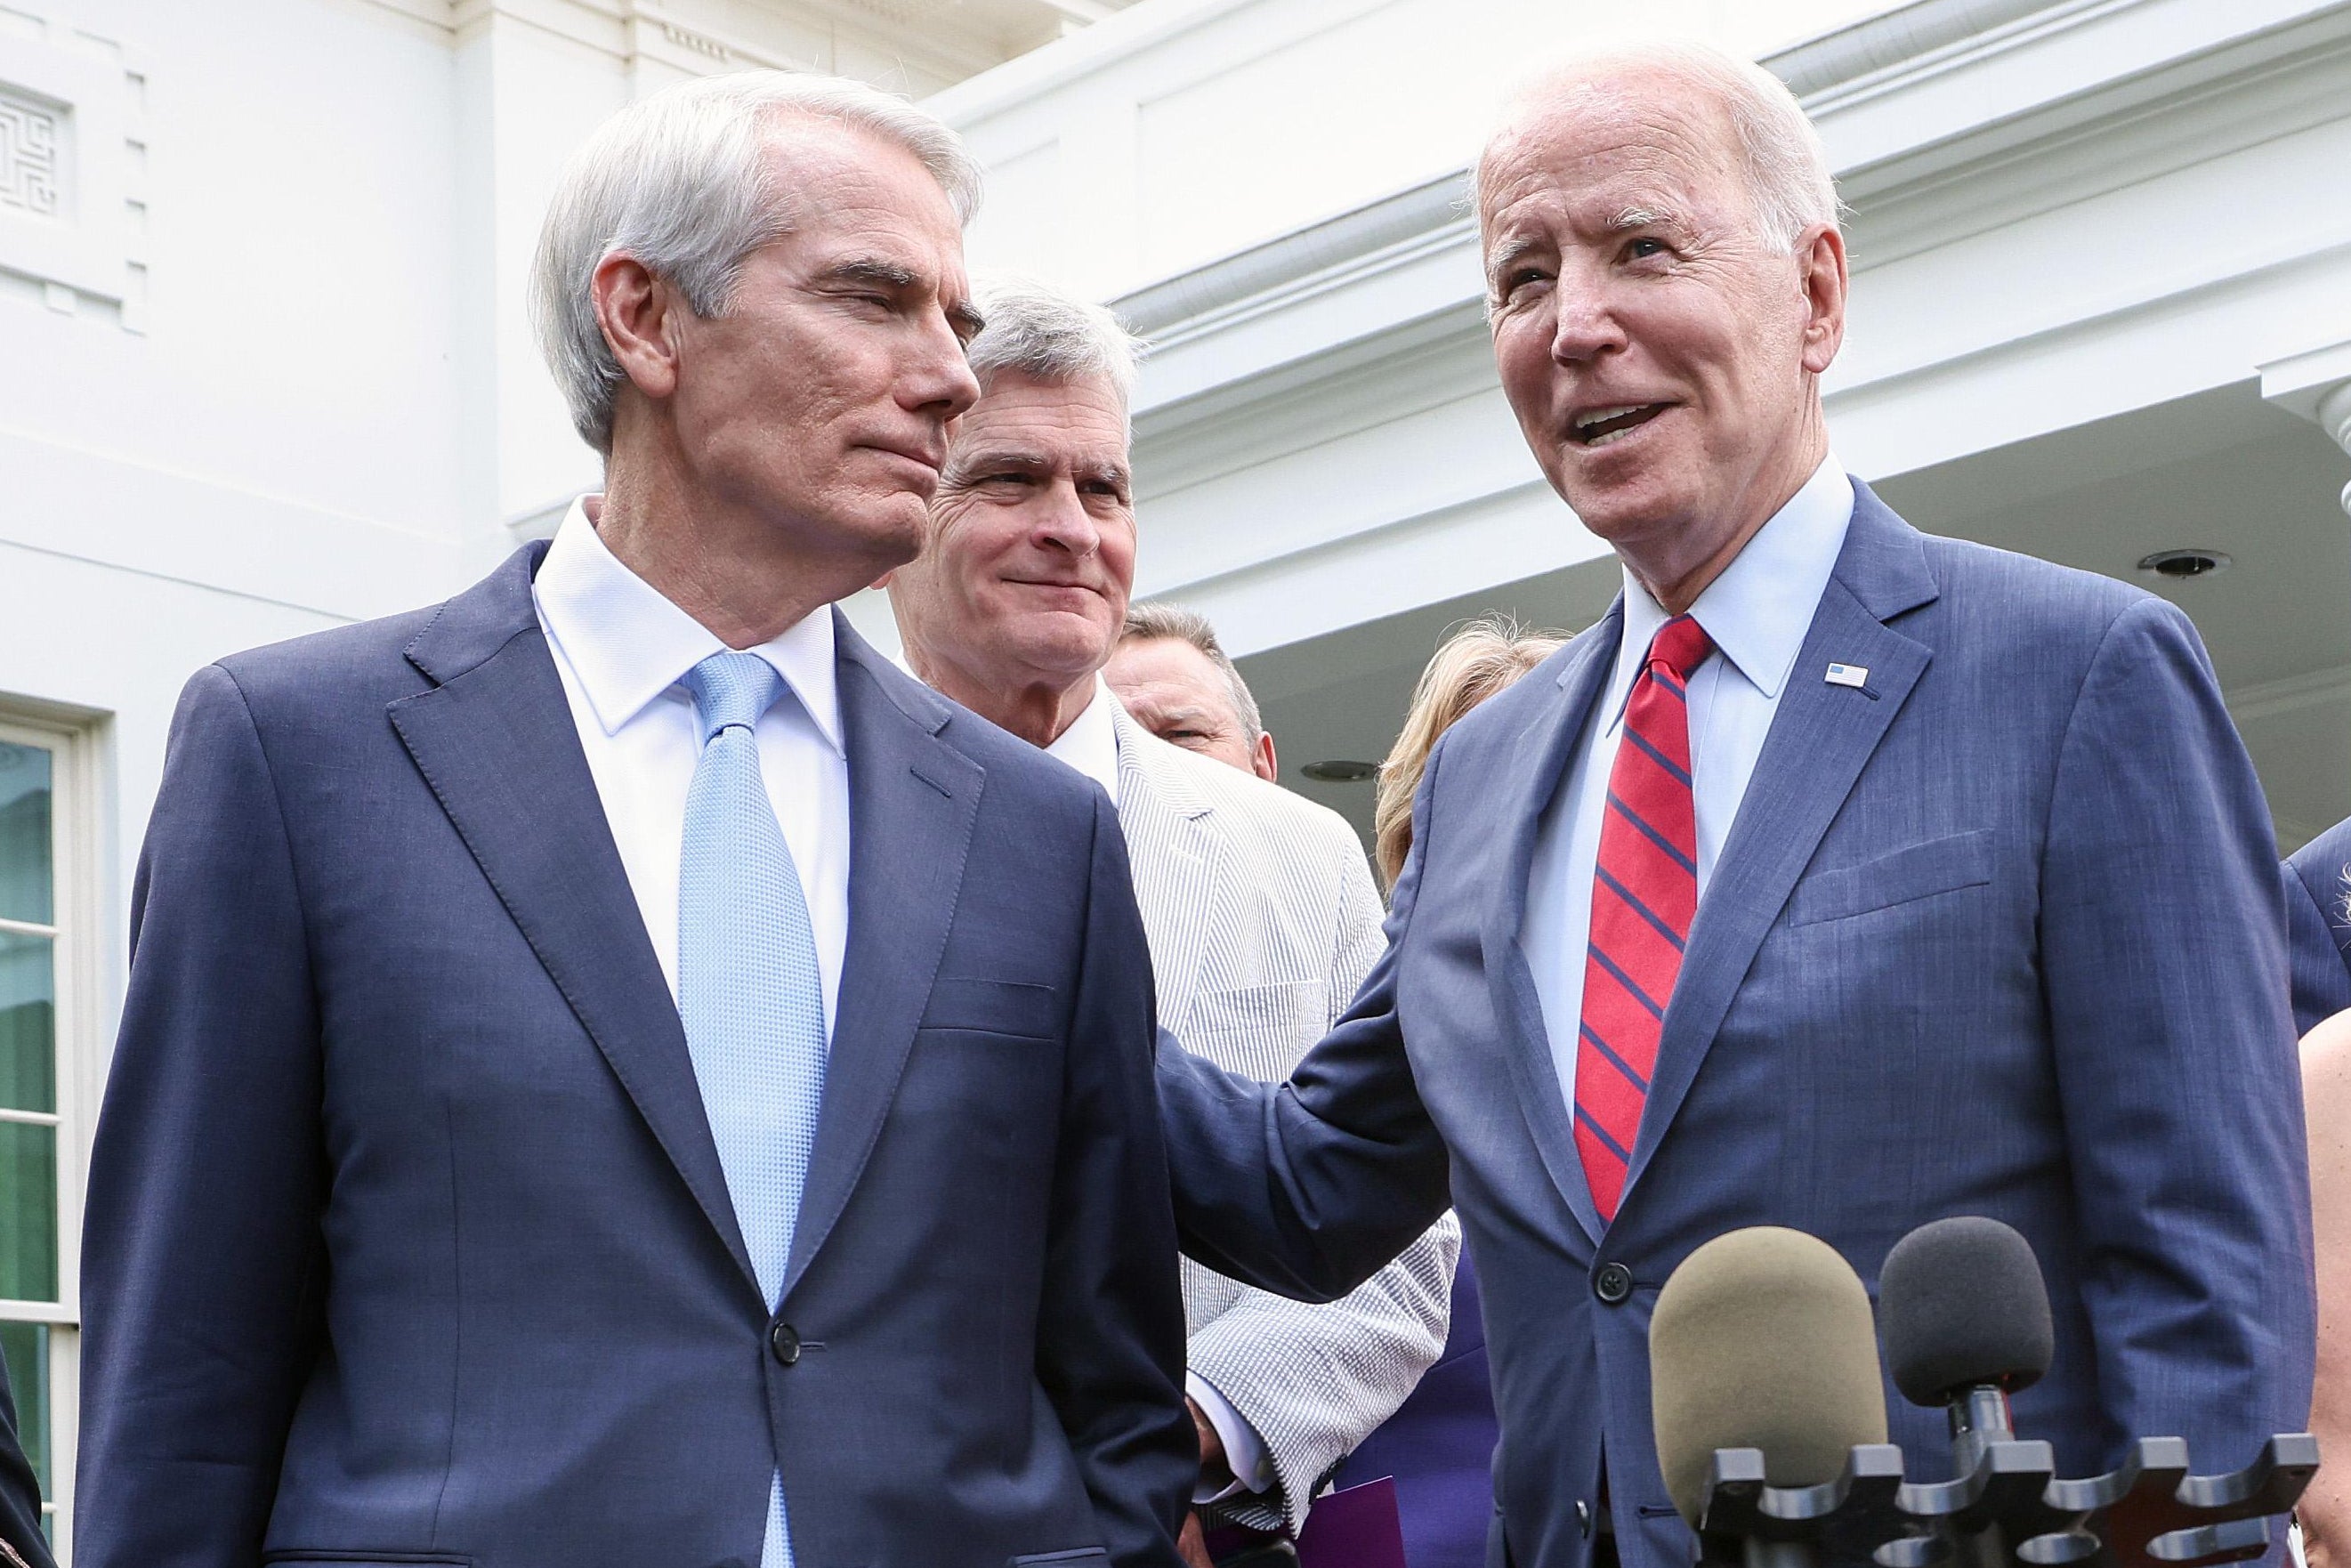 President Joe Biden puts his arm on Sen. Rob Portman (R-OH) as he speaks after the bipartisan group of Senators reached a deal on an infrastructure package at the White House on June 24, 2021 in Washington, D.C.